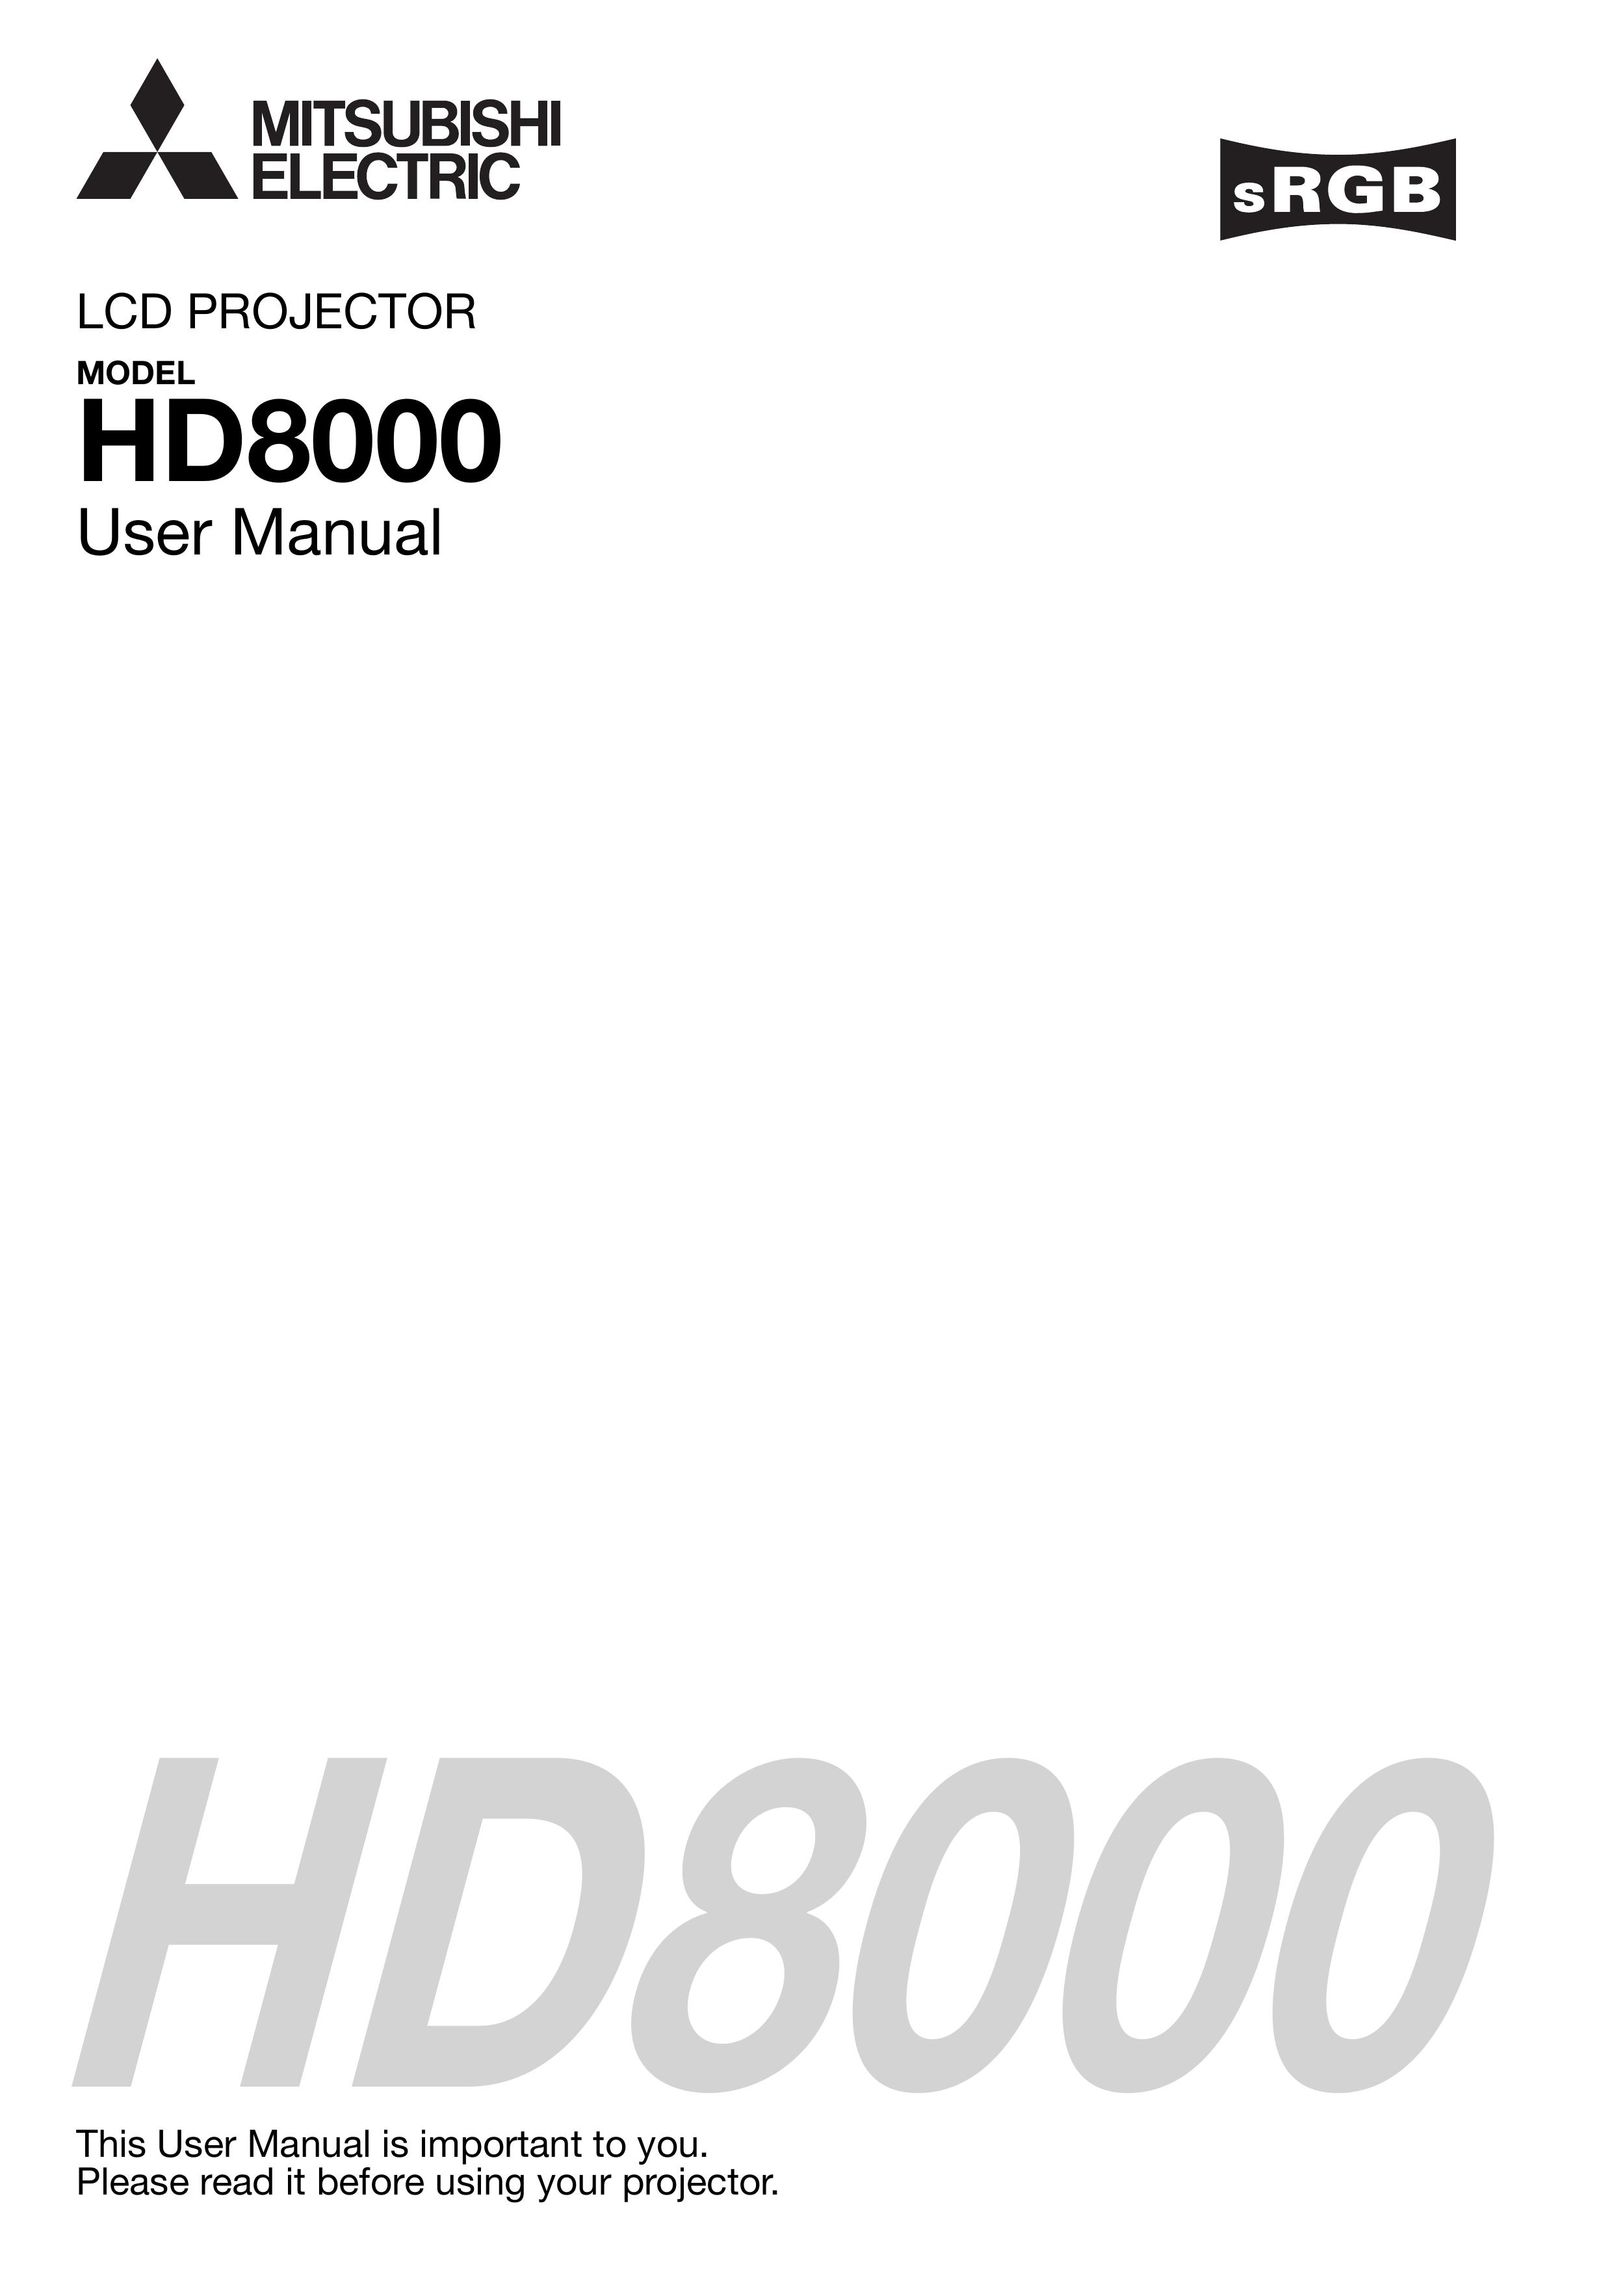 Mitsumi electronic HD8000 Projector User Manual